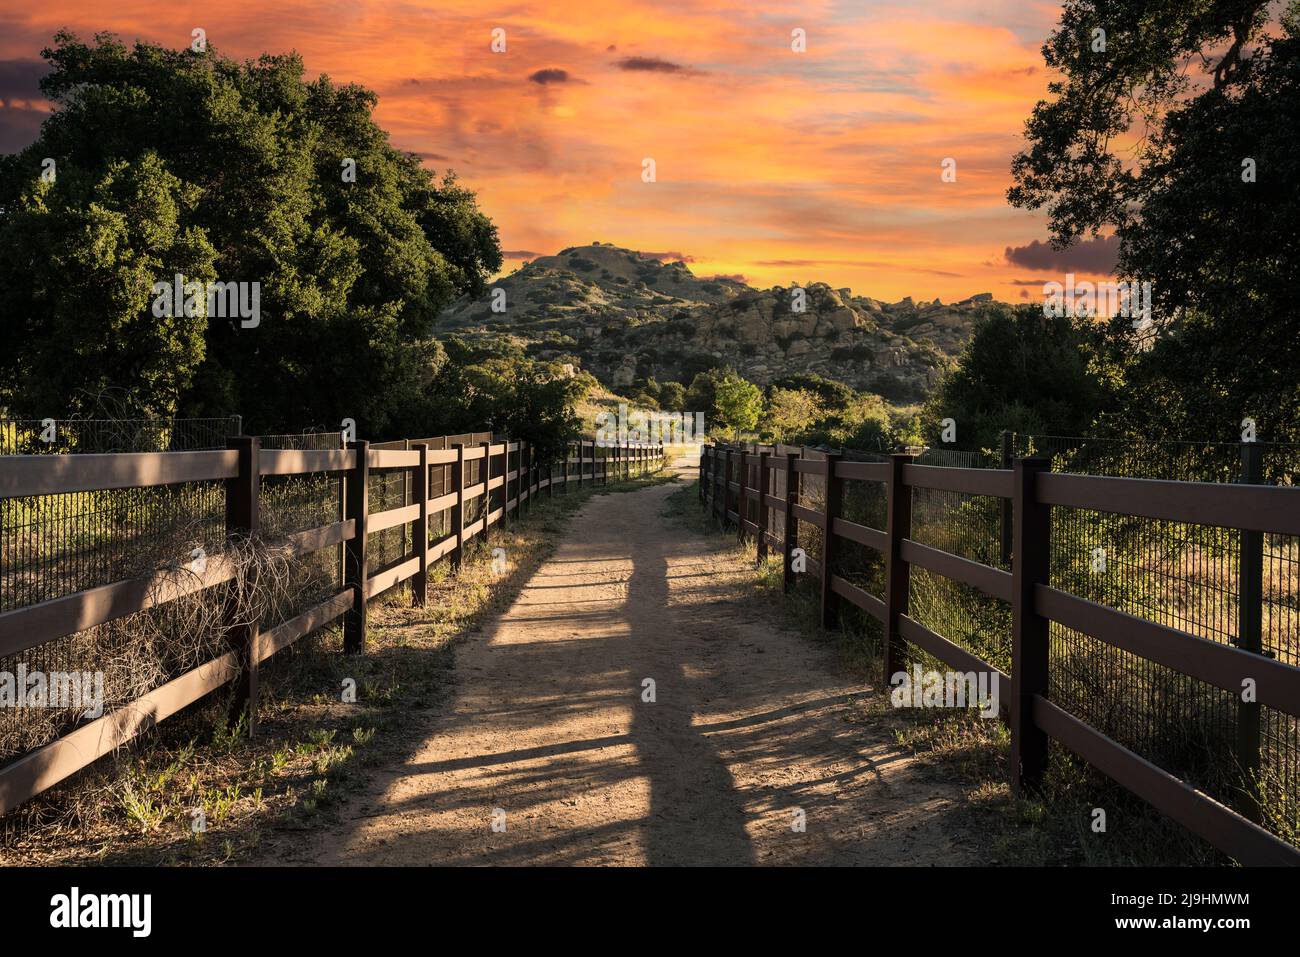 Sunrise view of equestrian trail leading to Chatsworth Park South in the San Fernando Valley area of Los Angeles, California. Stock Photo